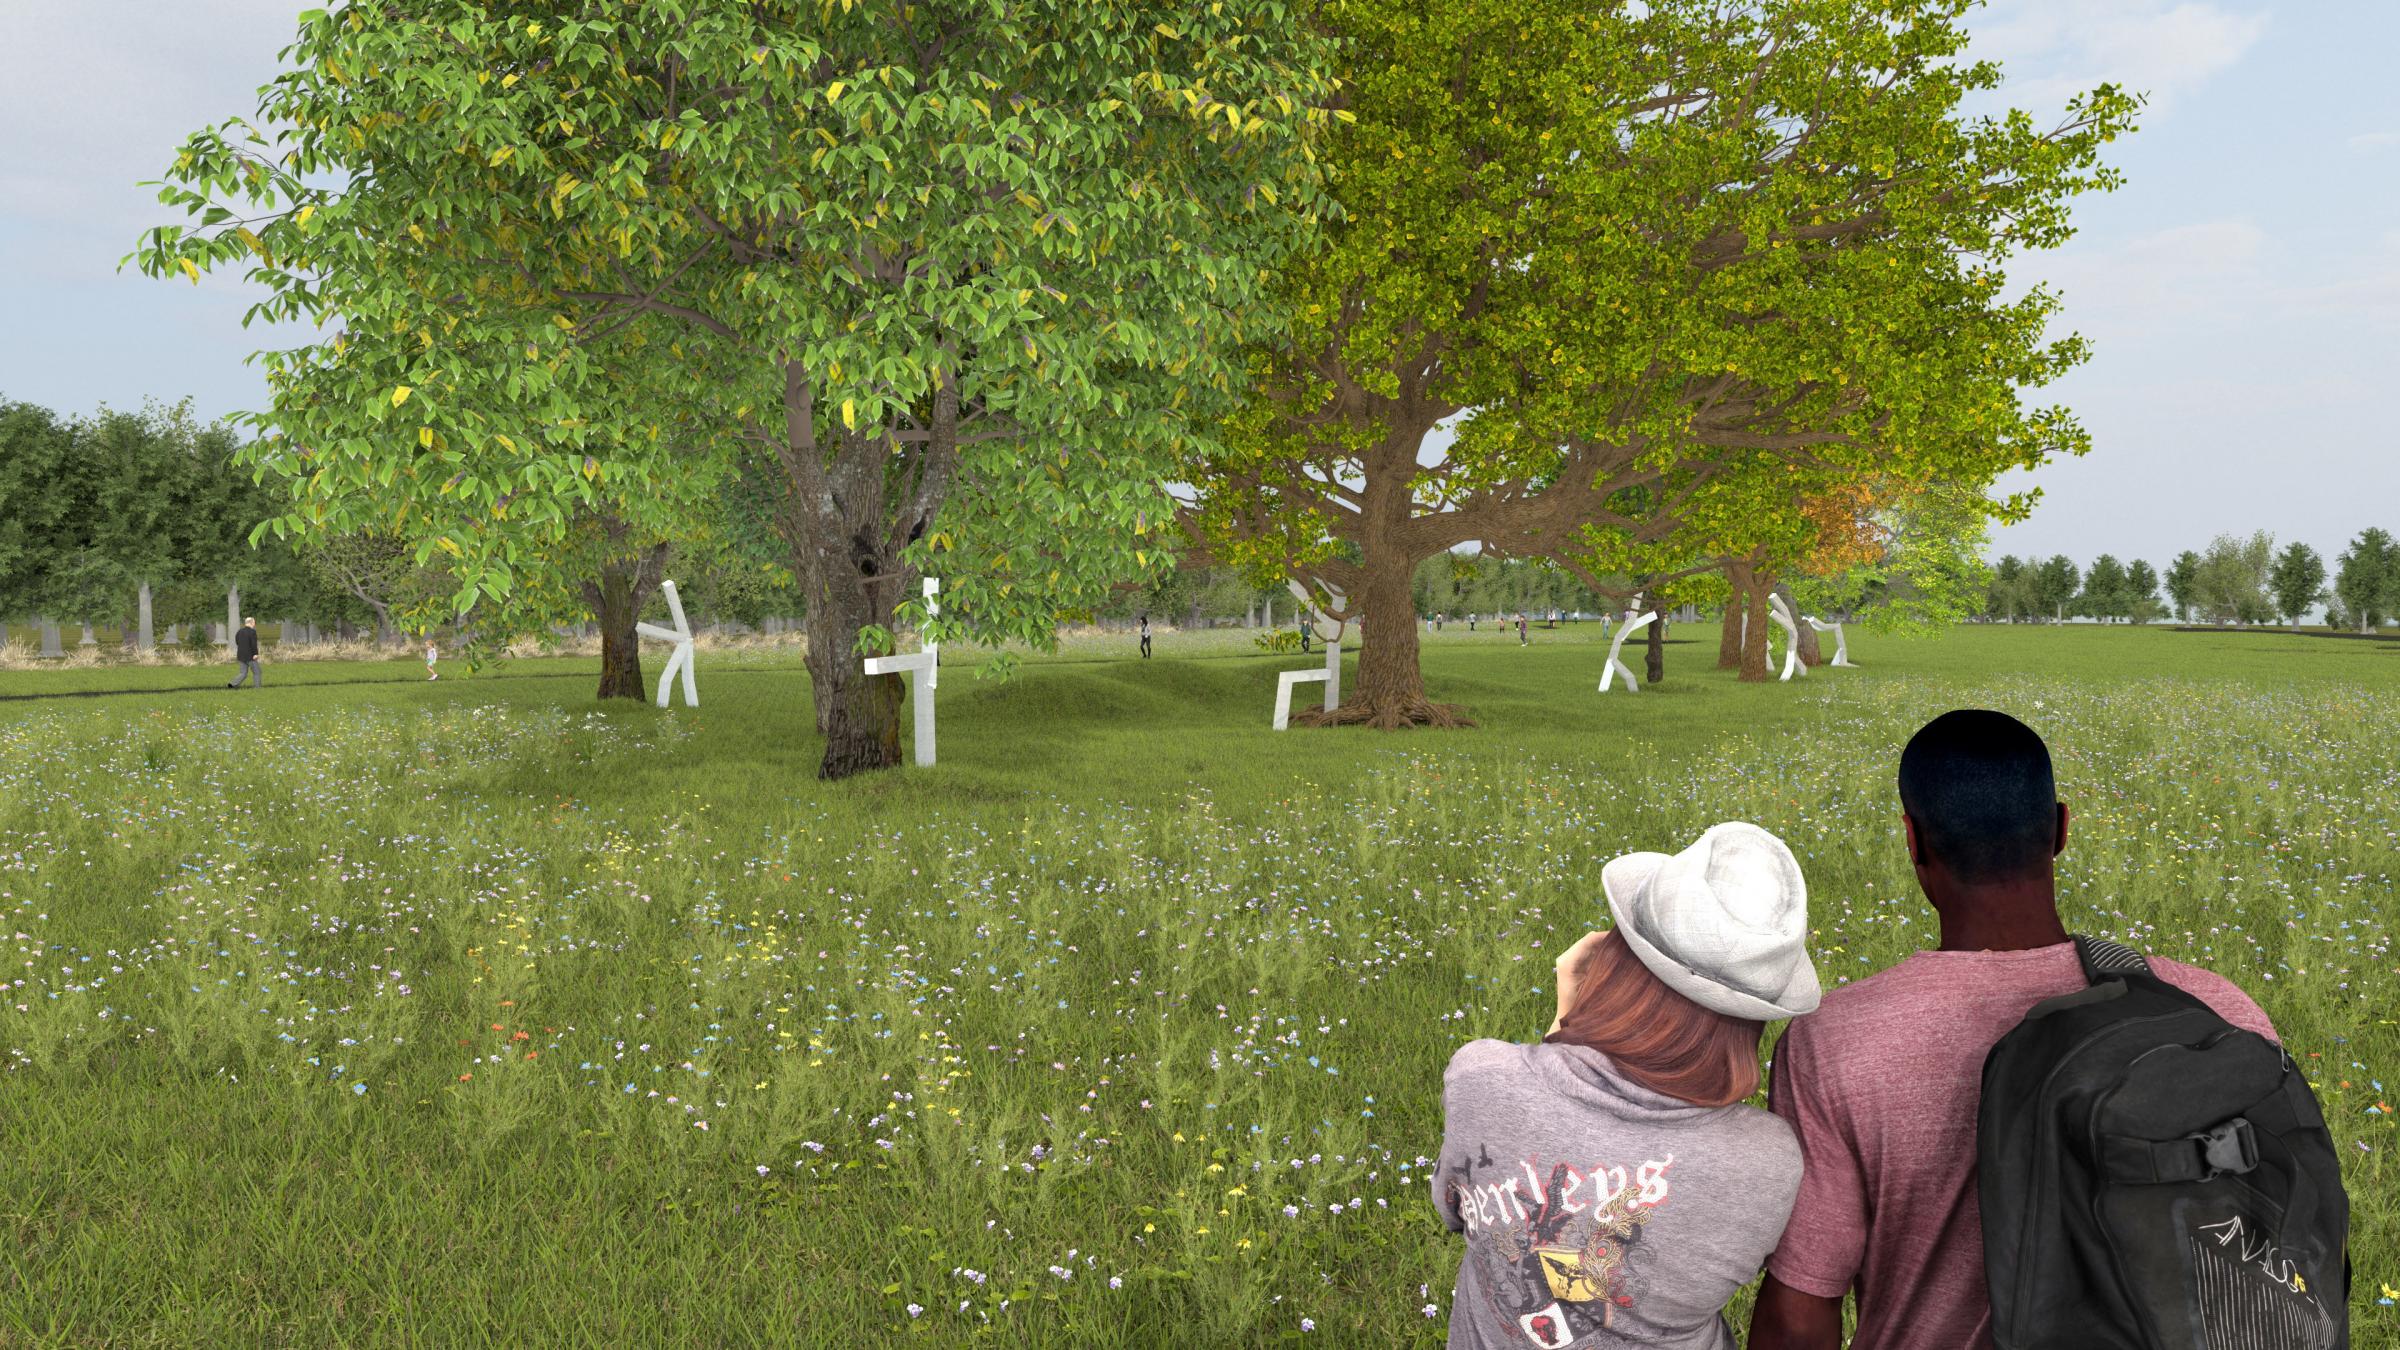 Artist impression of what will become The Herald covid memorial in Pollok Country Park.